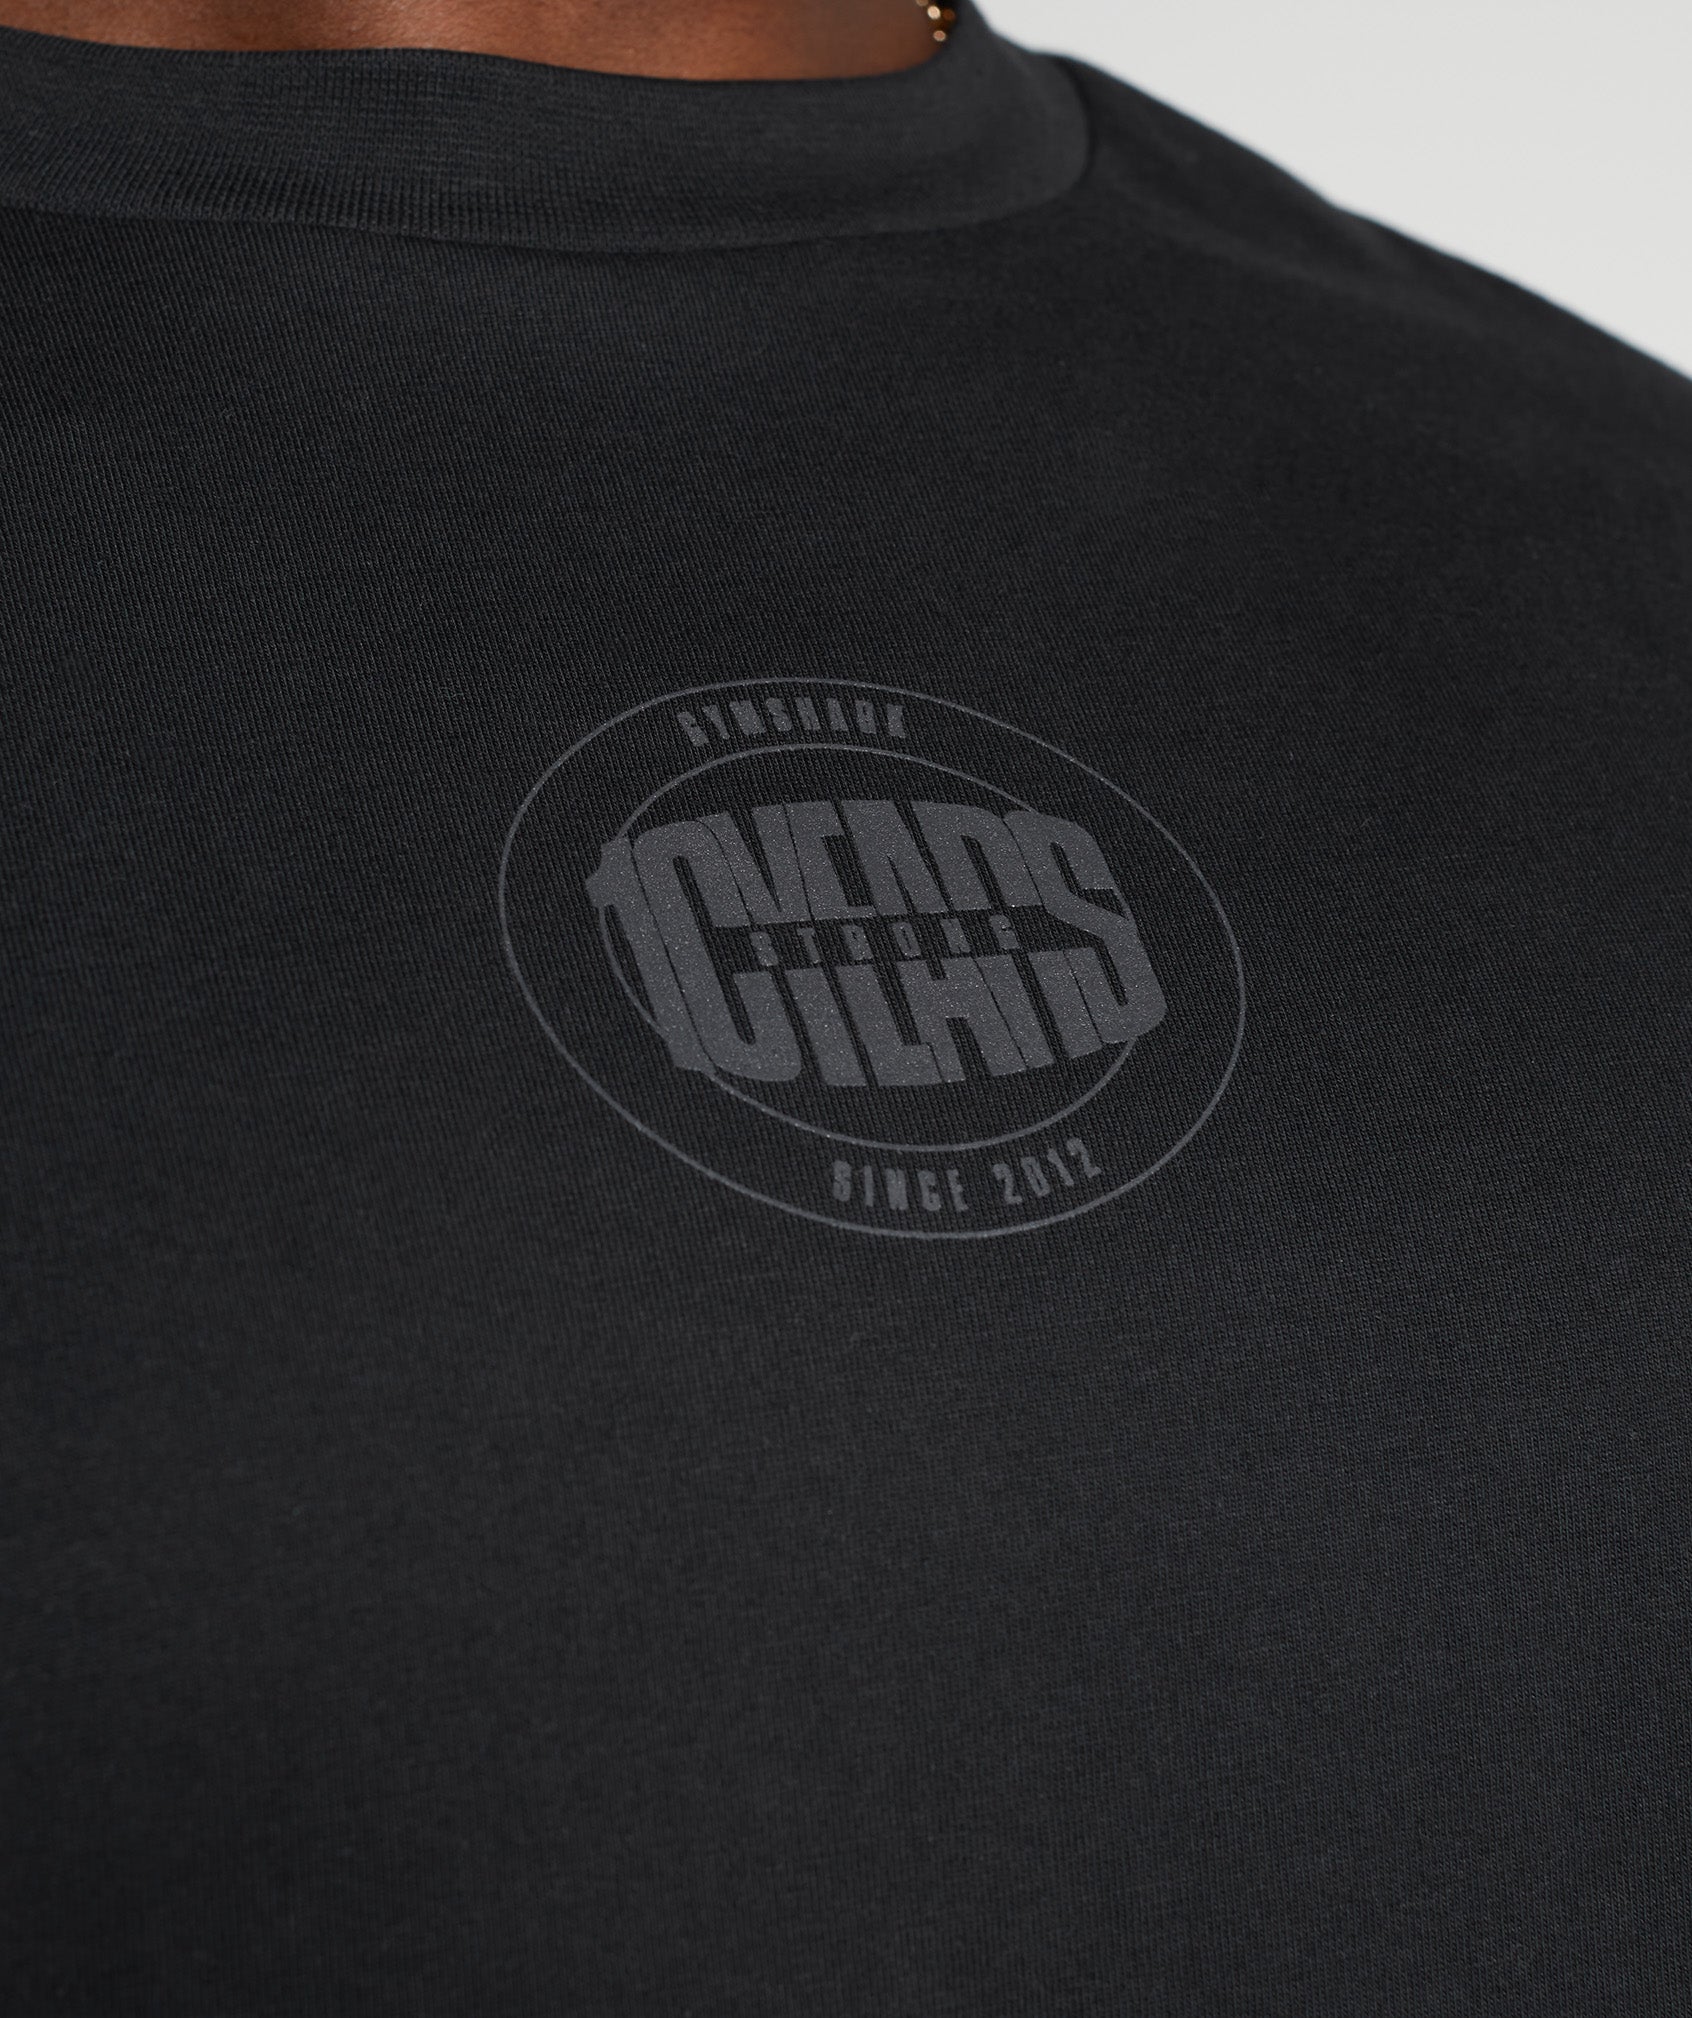 GS10 Year Oversized Long Sleeve T-Shirt in Black - view 6